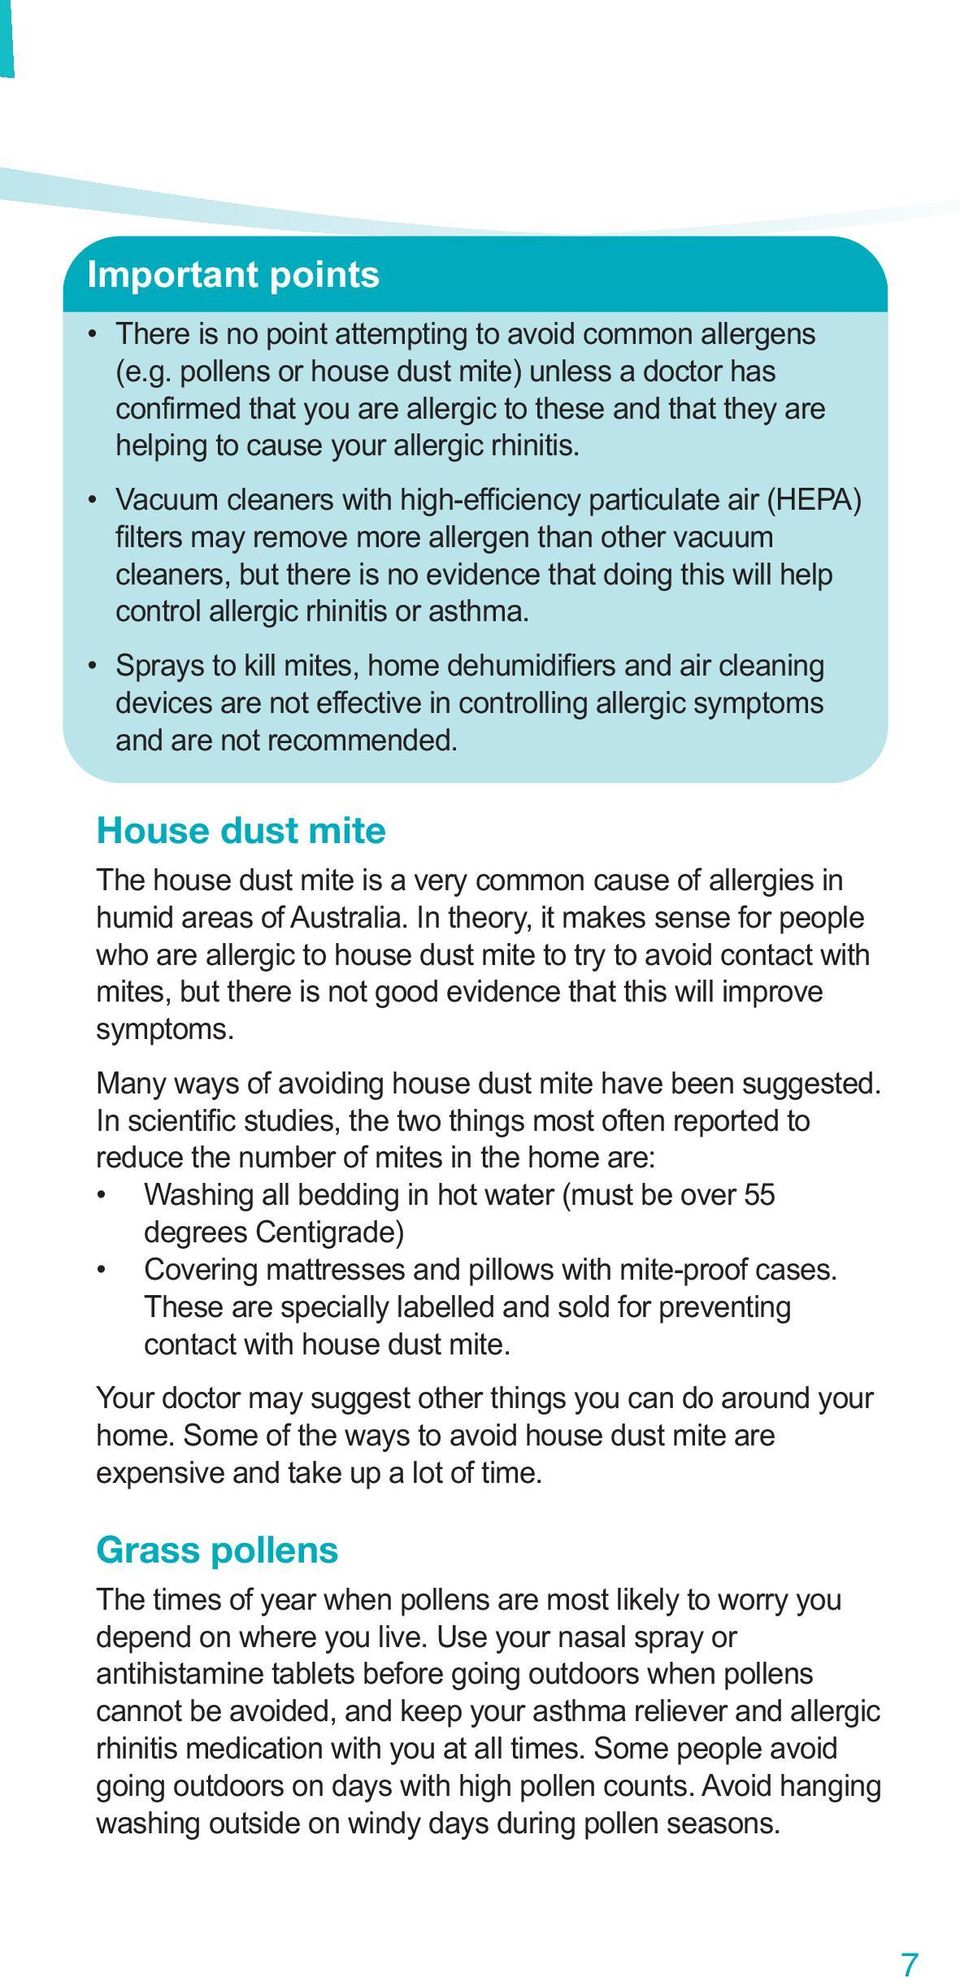 or asthma. Sprays to kill mites, home dehumidifiers and air cleaning devices are not effective in controlling allergic symptoms and are not recommended.